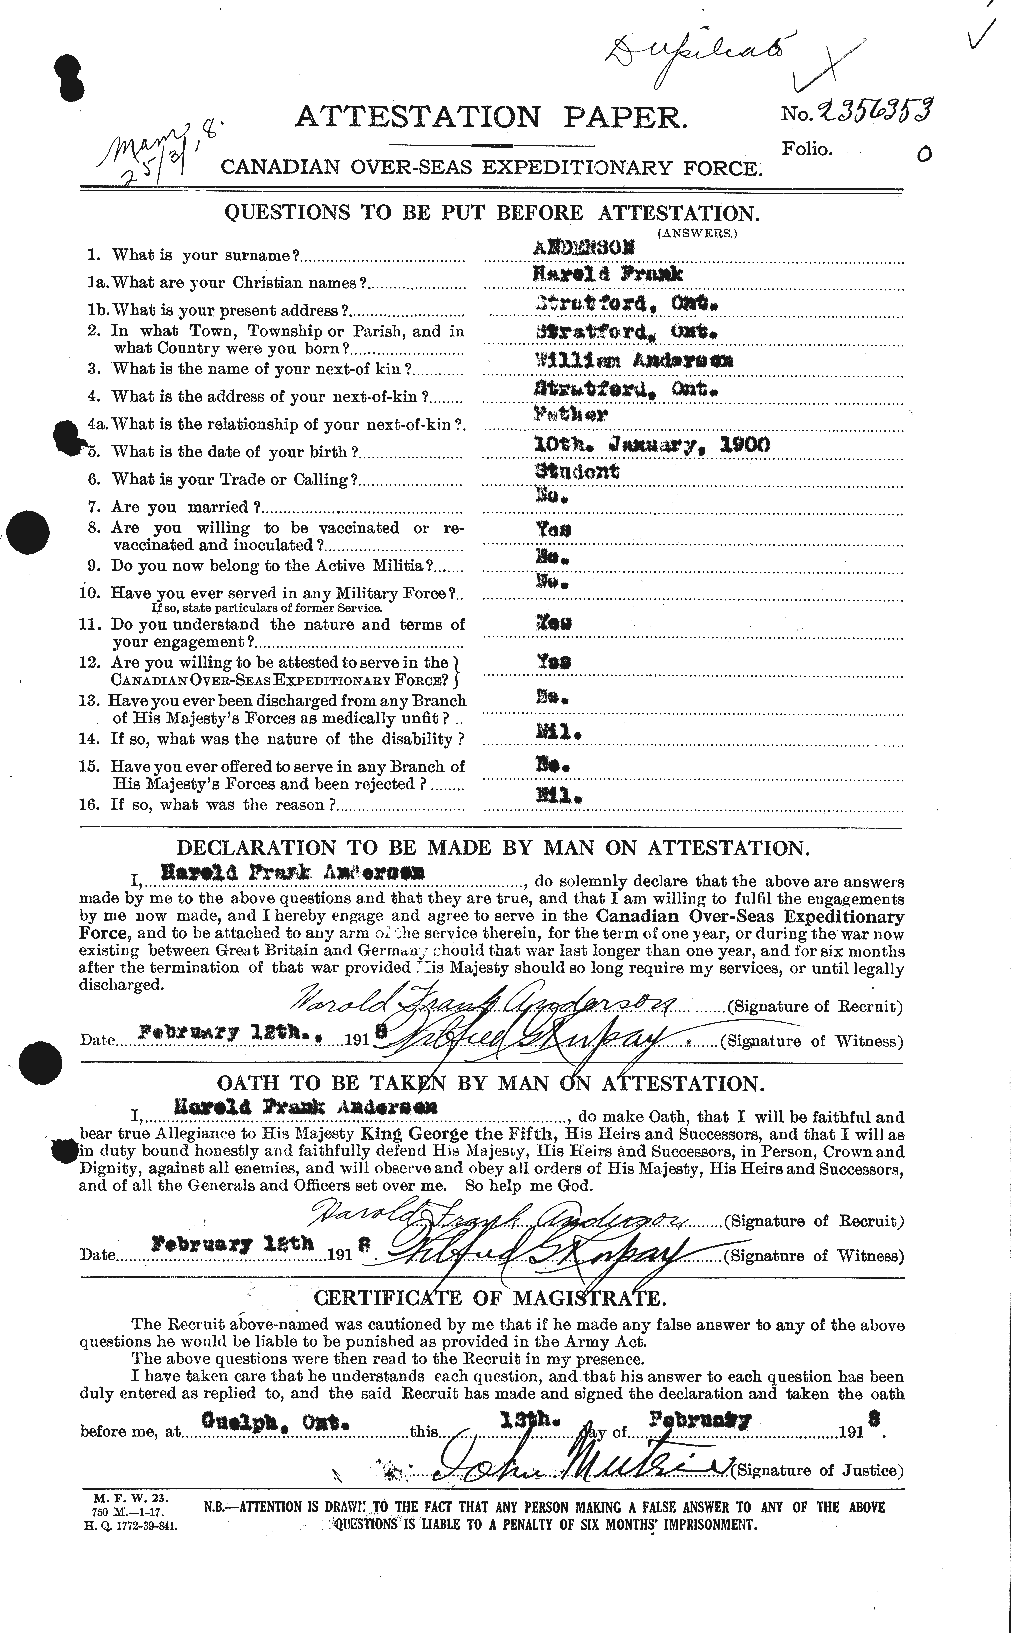 Personnel Records of the First World War - CEF 213290a